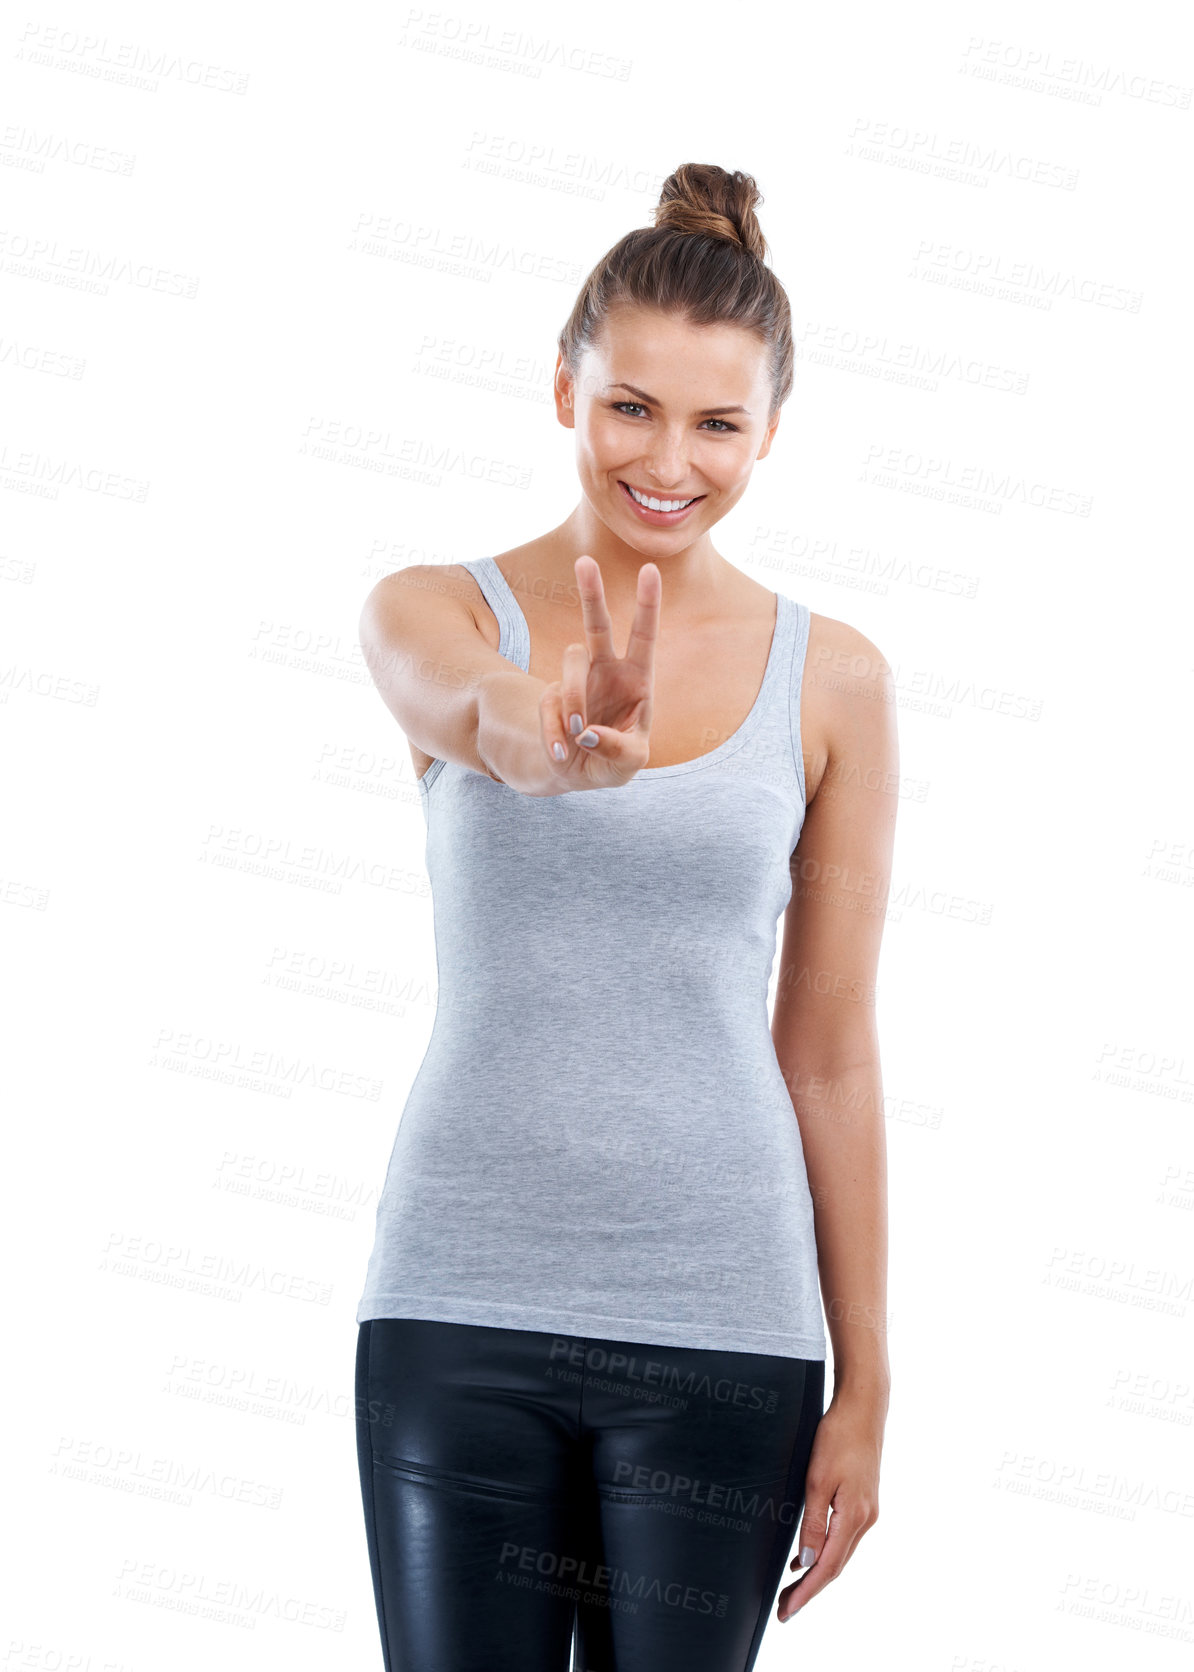 Buy stock photo Trendy young woman giving a peace gesture against a white background